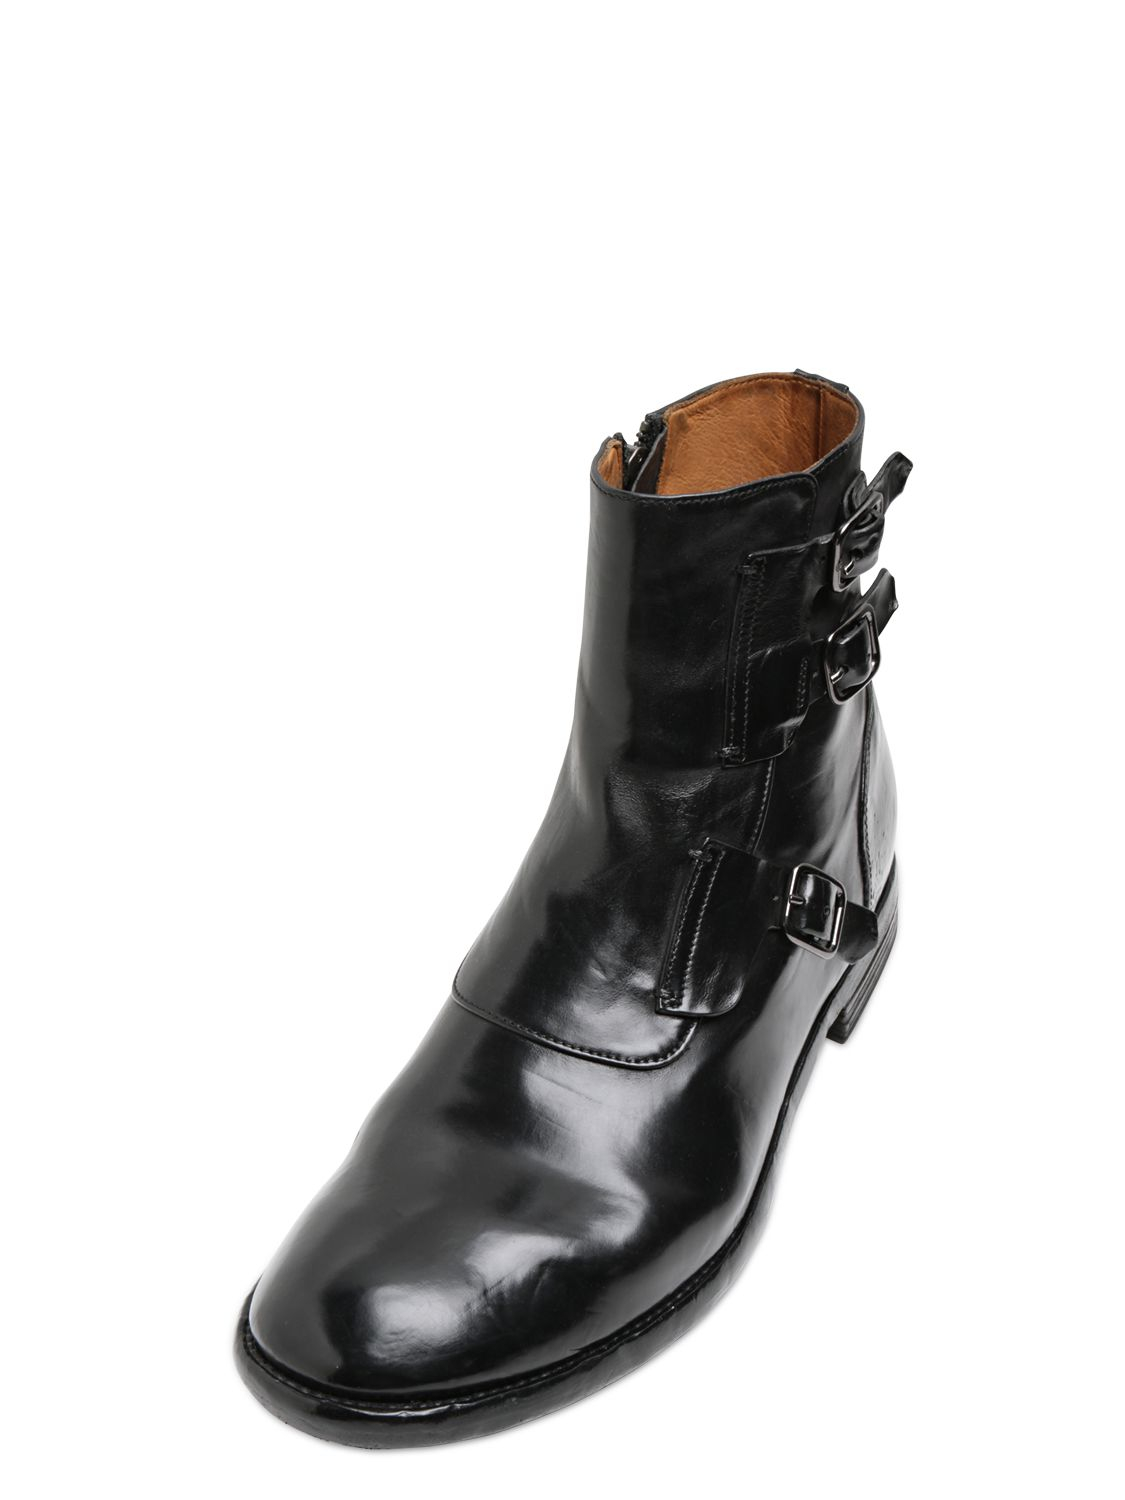 Lyst - Officine creative Brushed Leather Monk Strap Boots in Black for Men